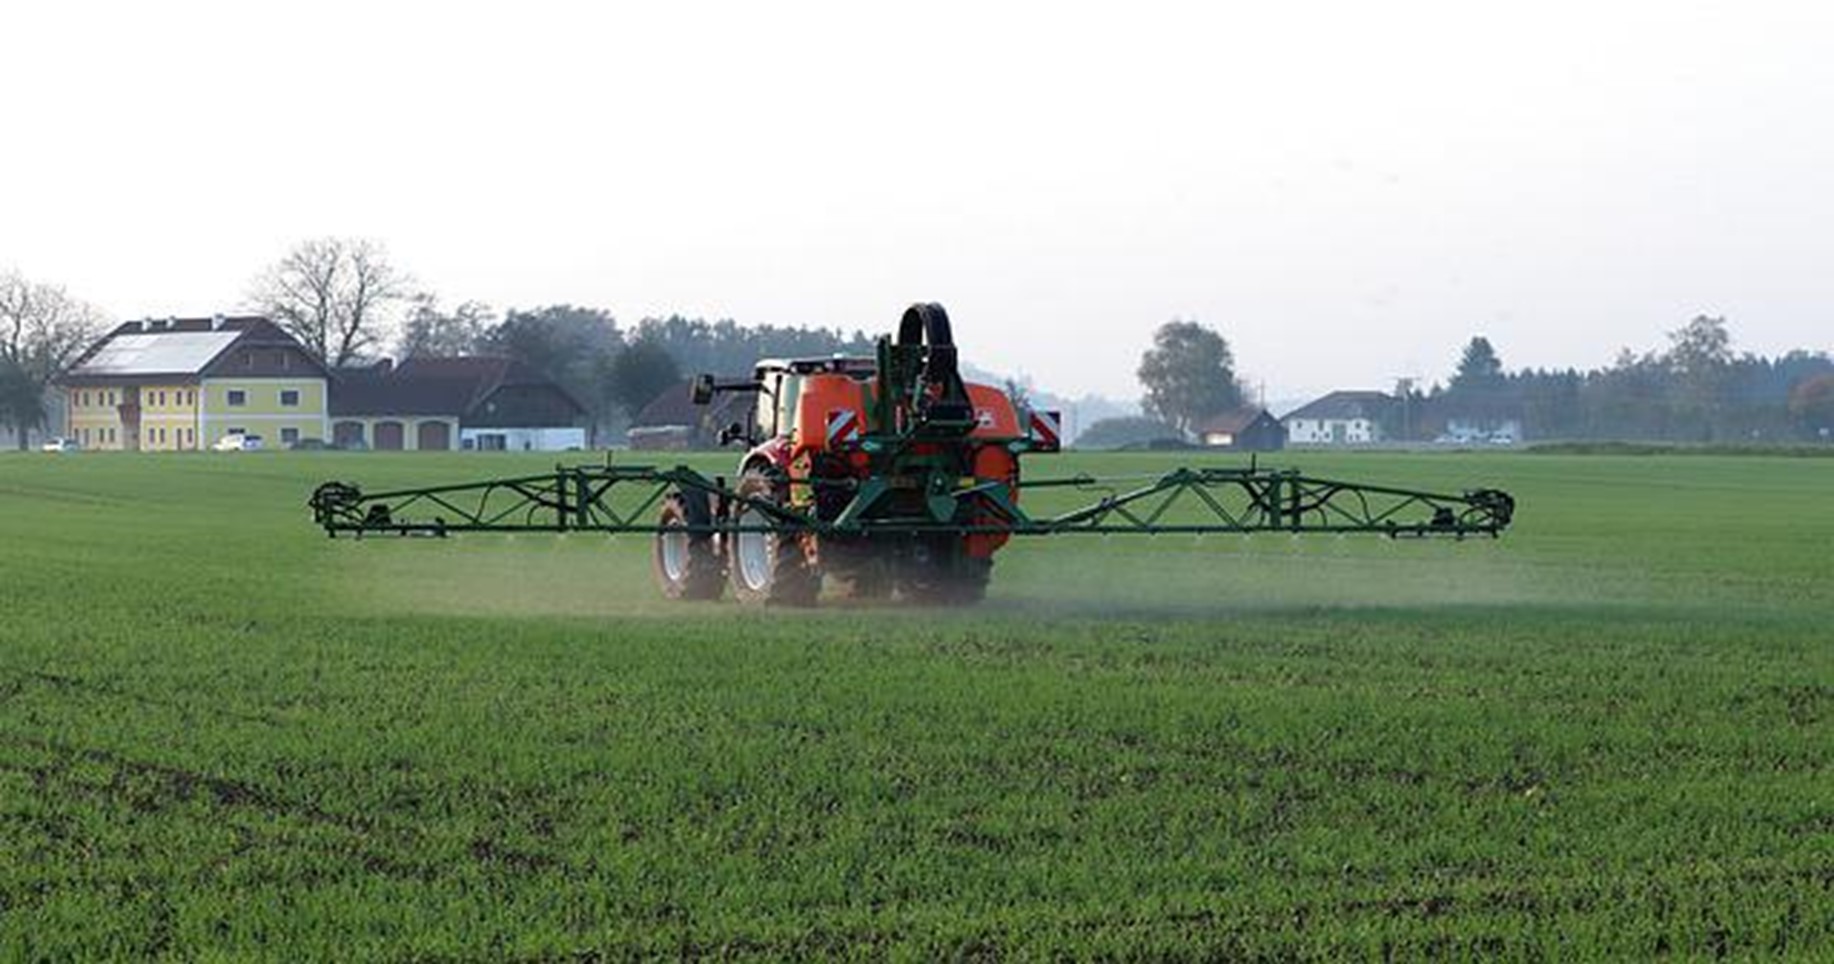 Pest control tractor spraying field.